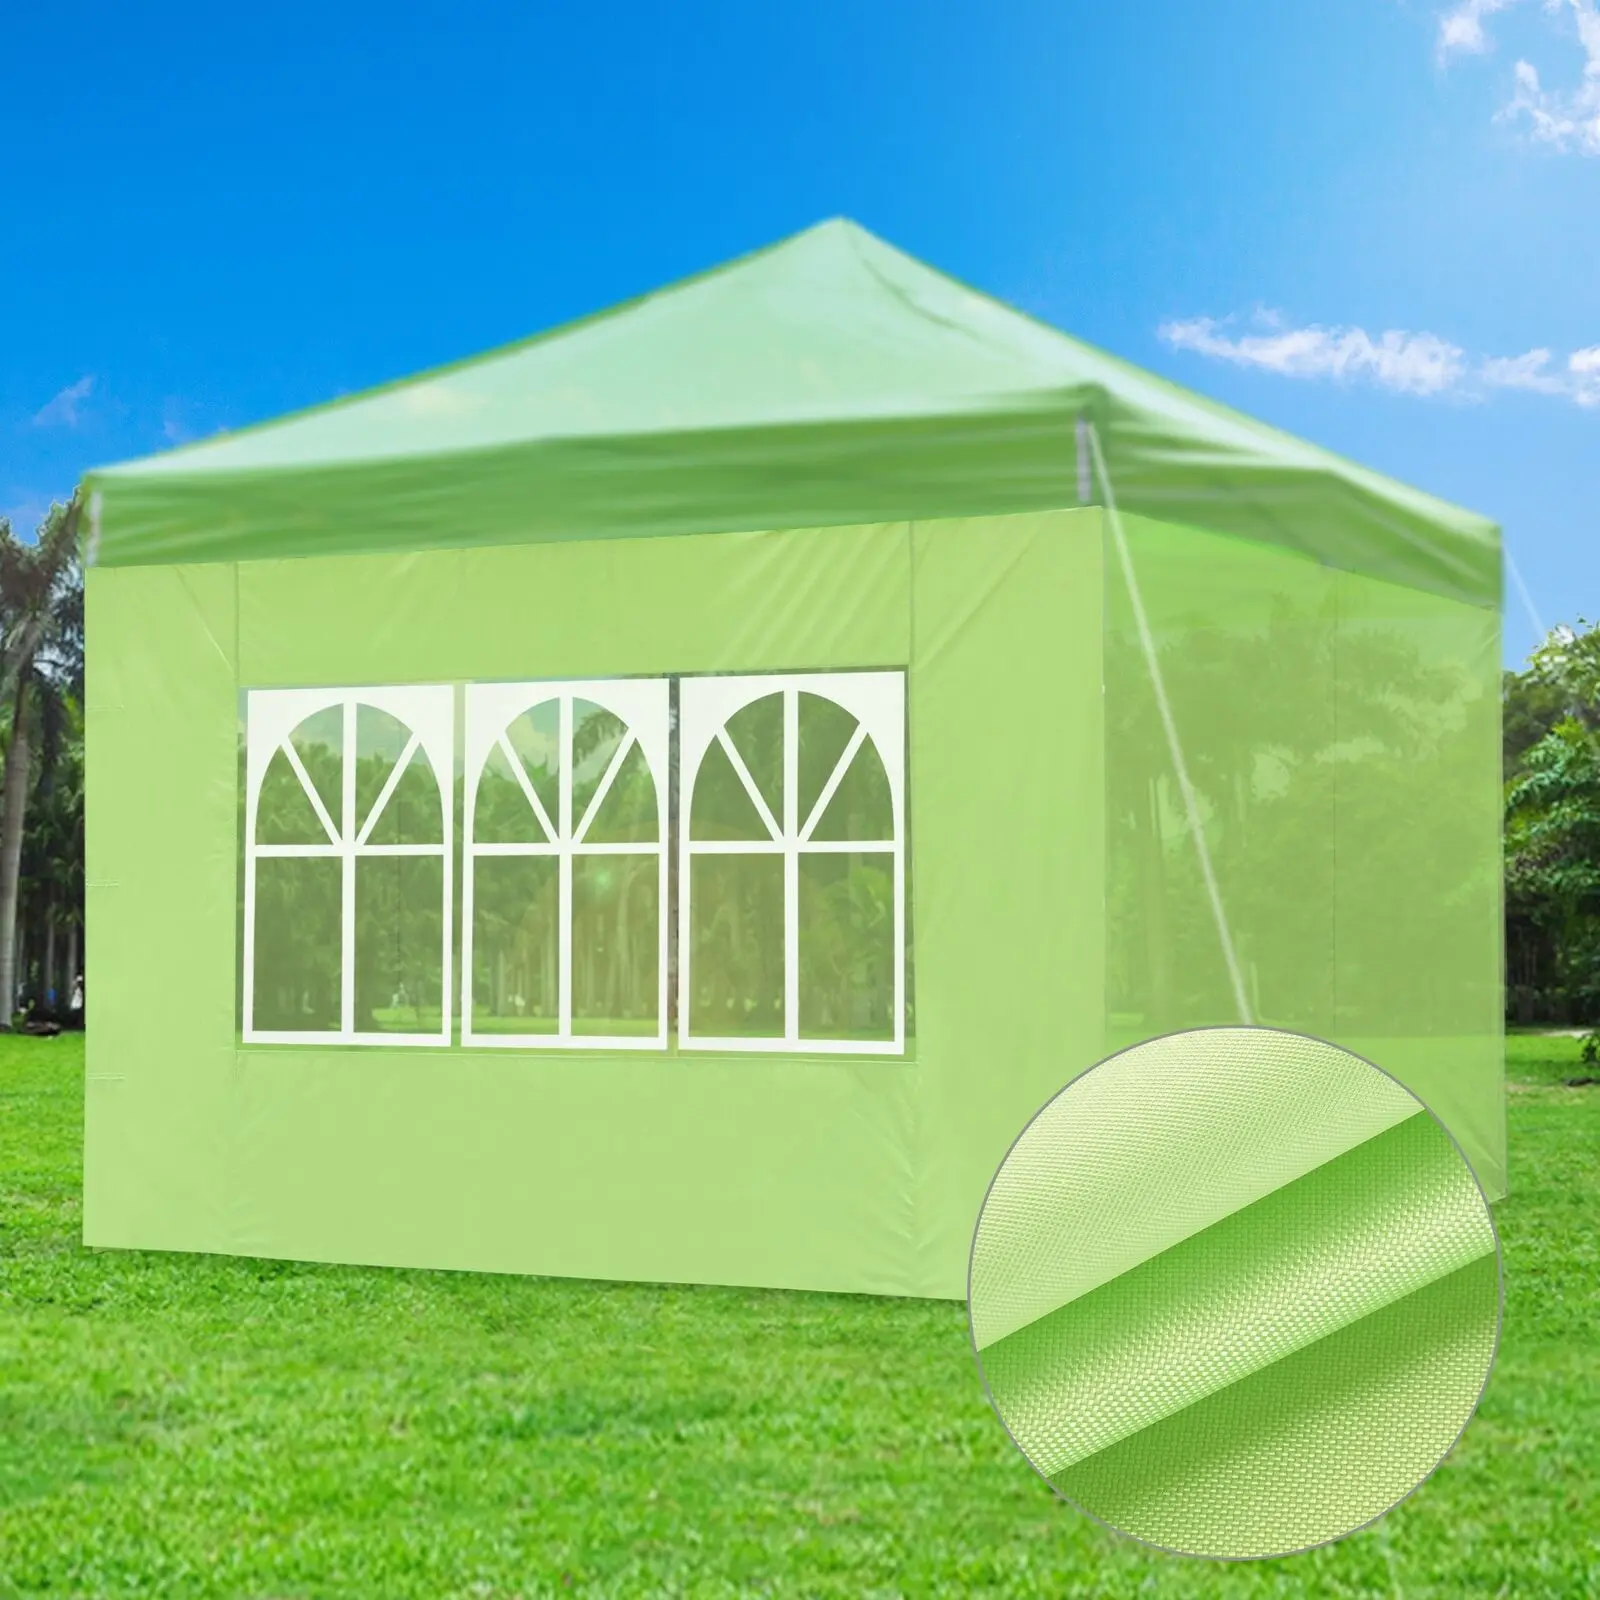 10x7ft Canopy Gazebo with Windows UV30+ Protection & Fade Resistance Green